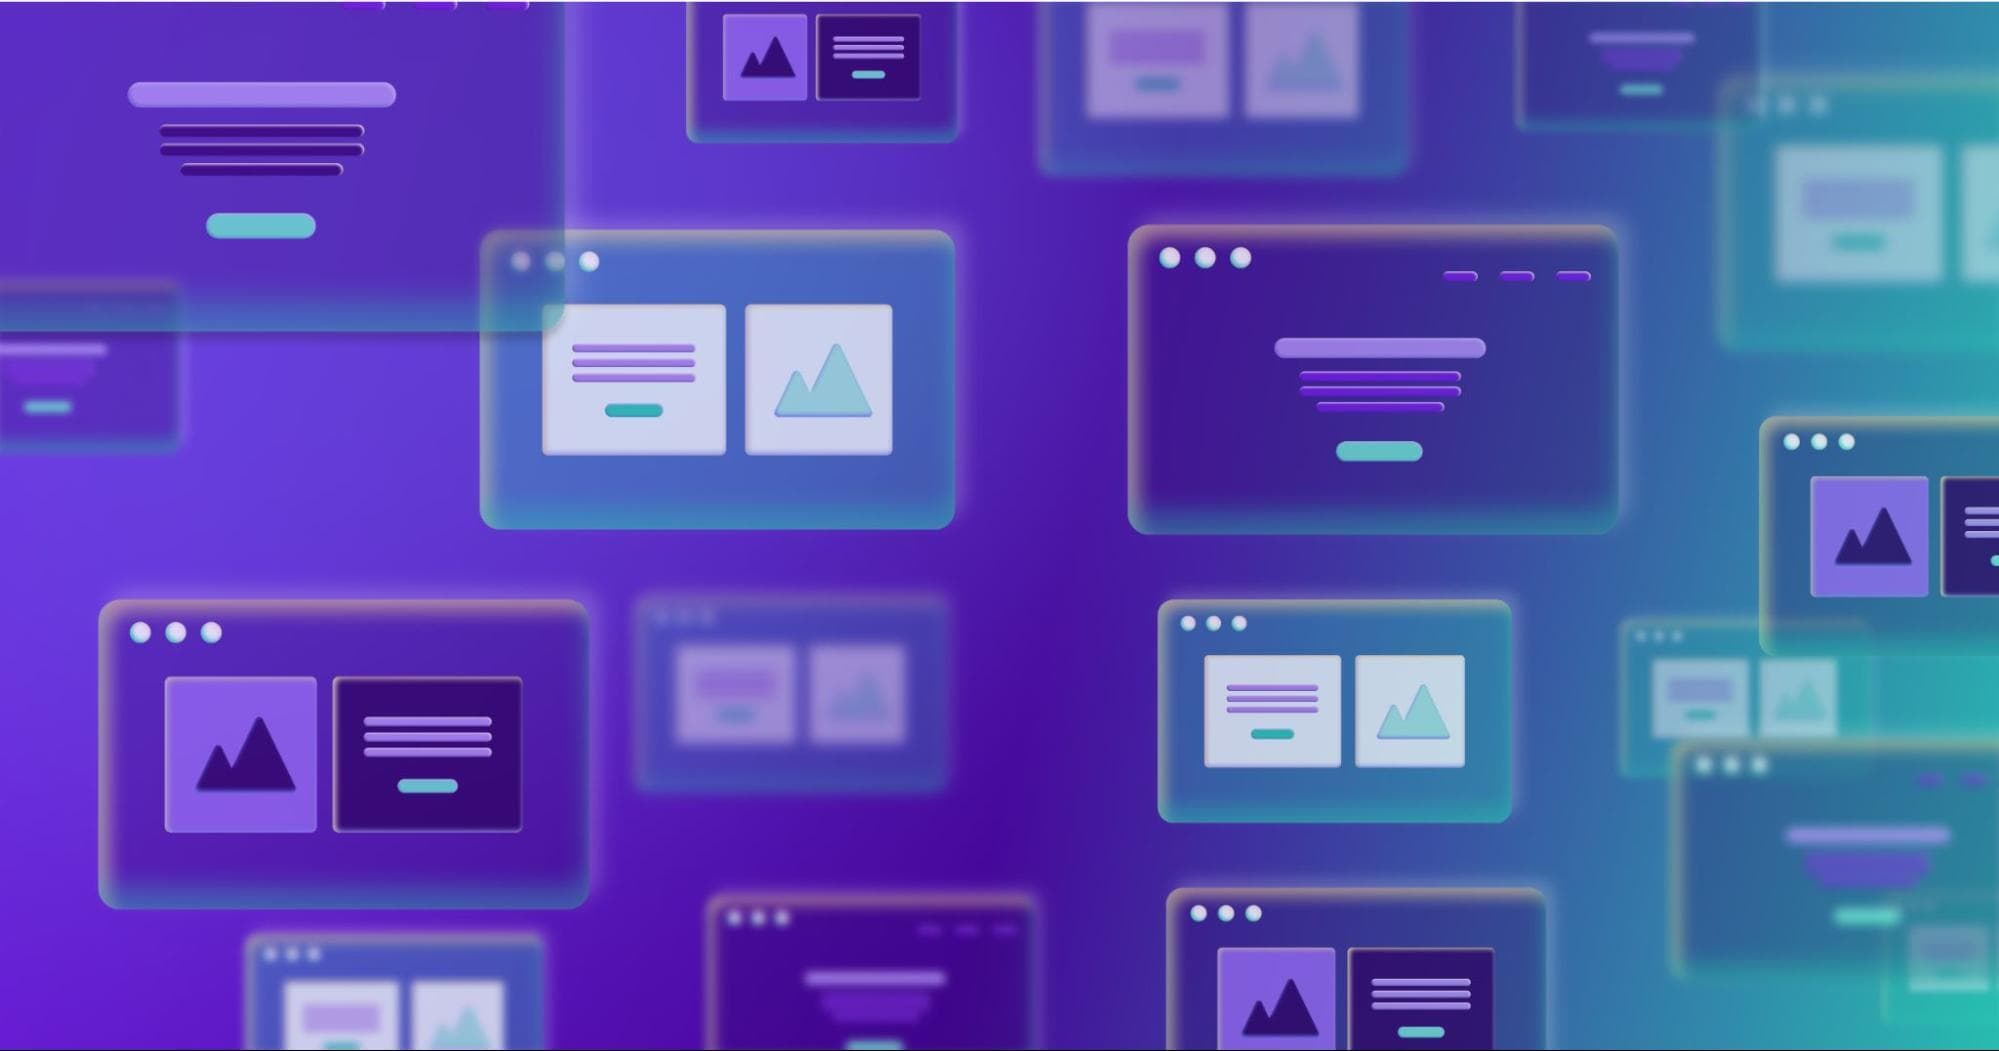 Illustration of several web page examples floating against a purple and teal background.